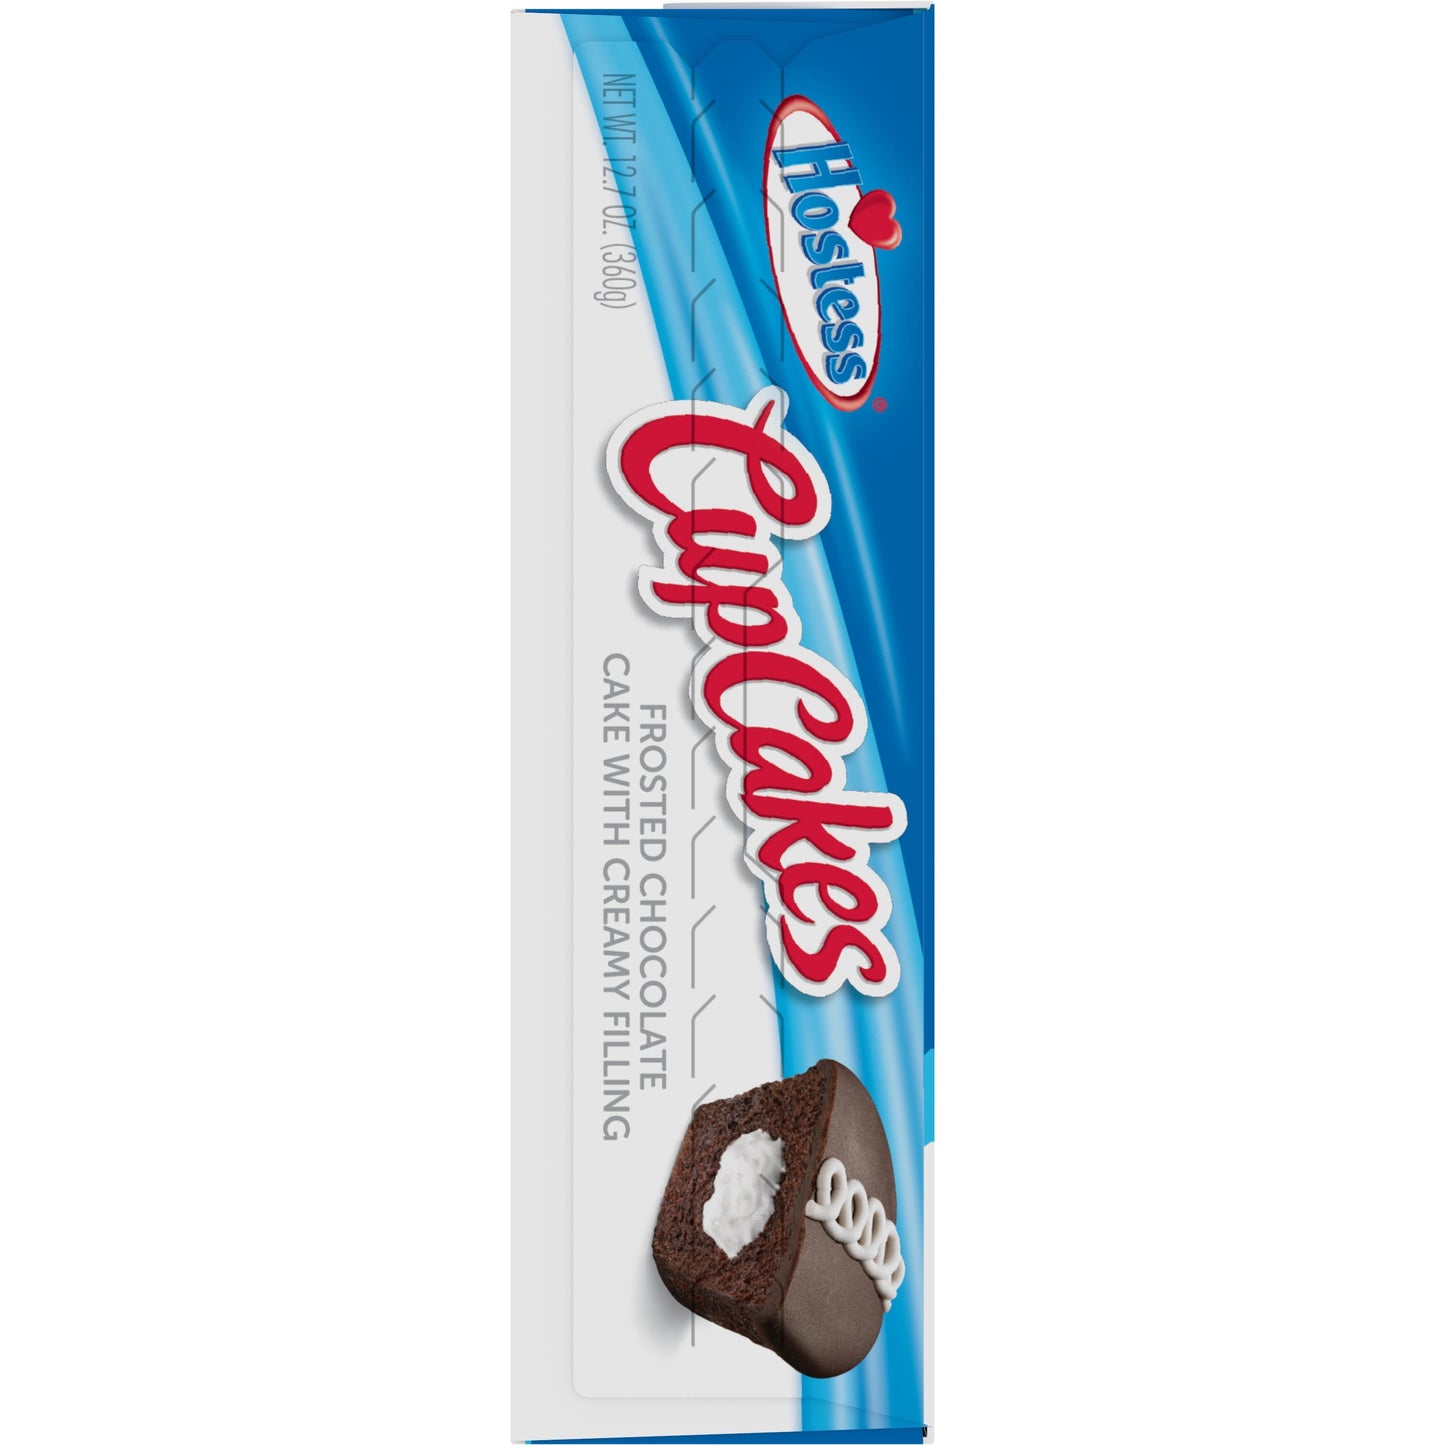 HOSTESS Chocolate Cup Cakes, Creamy, 8 count, 12.7 oz